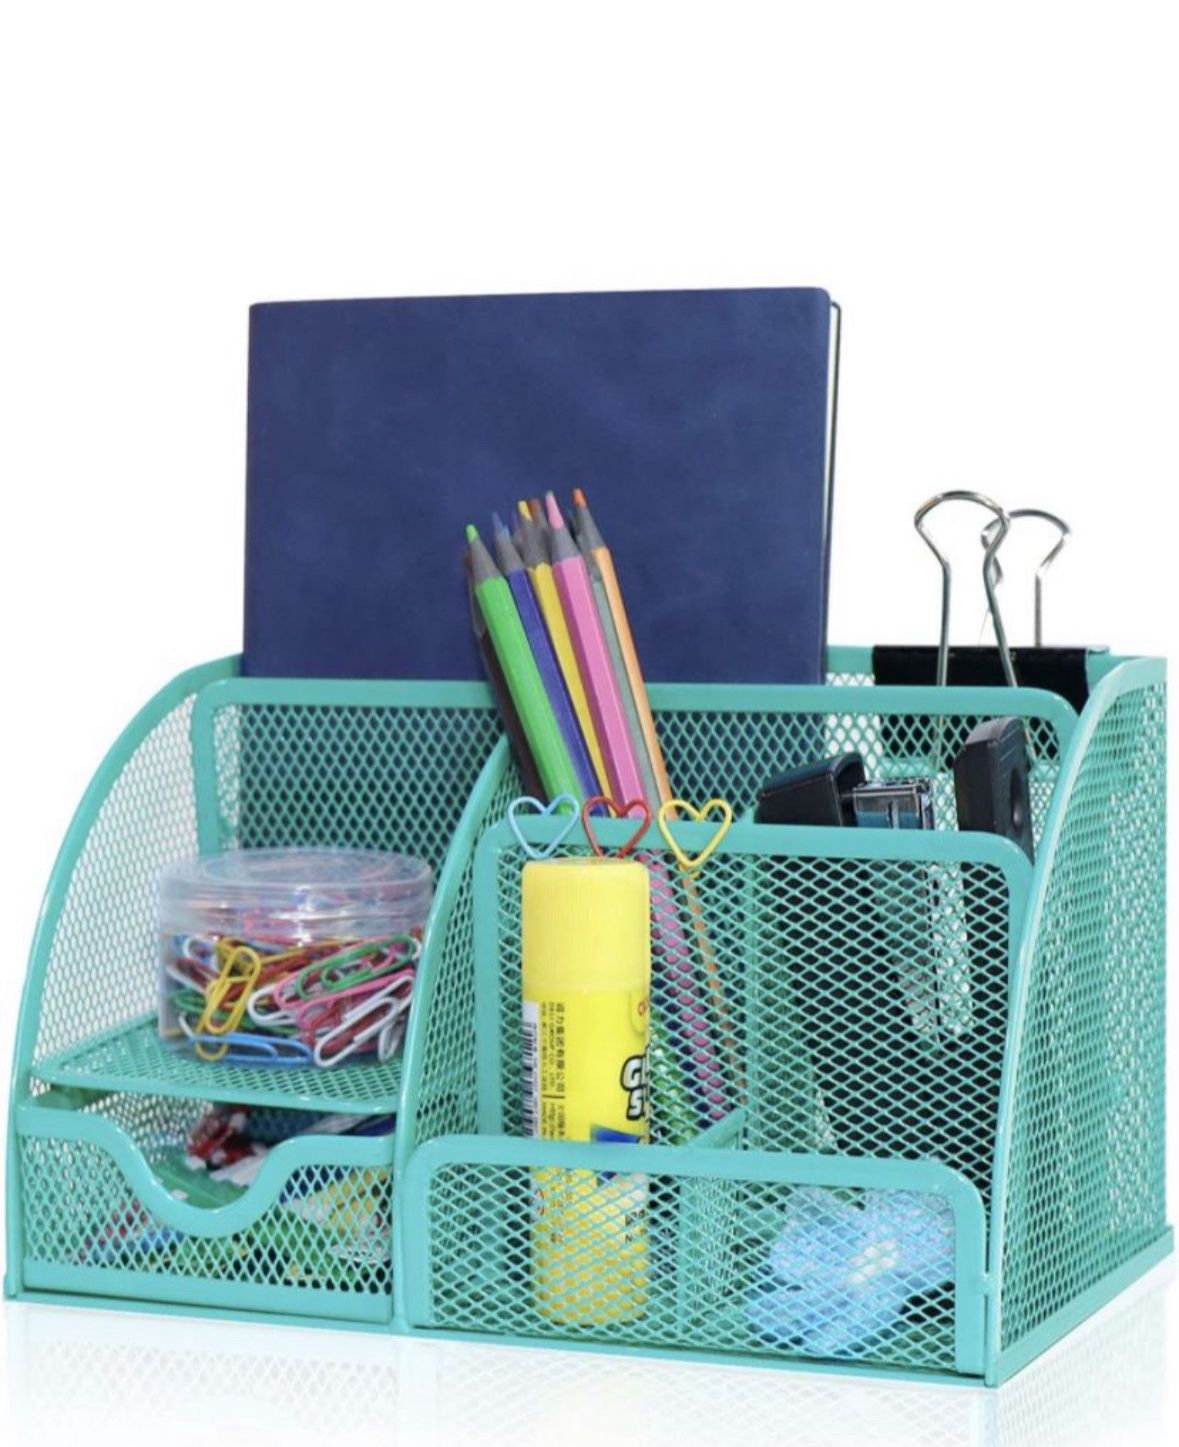 Desk Organizer Office Accessories, Multi-Functional Mesh Desk Organizer with 6 Compartments and 1 Drawer for Home, Office, School, Workshop, kitchen (